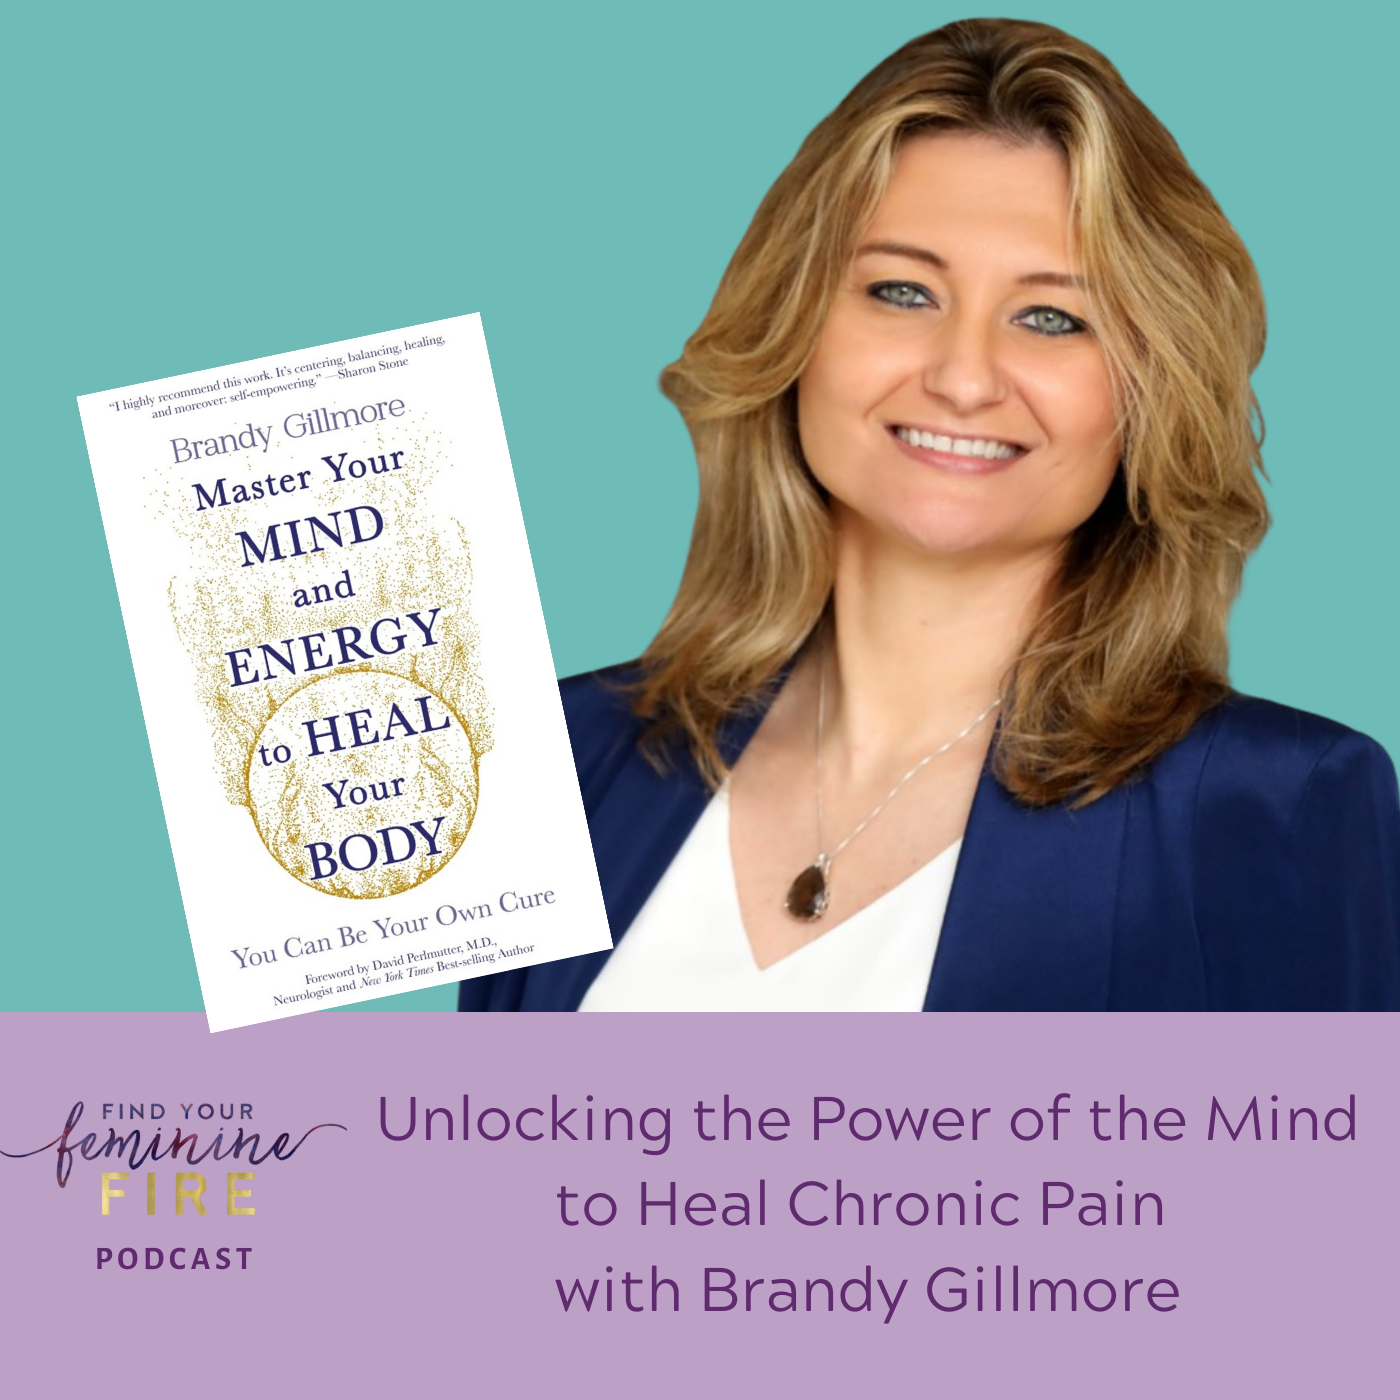 Unlocking the Healing Power of the Mind with Brandy Gillmore